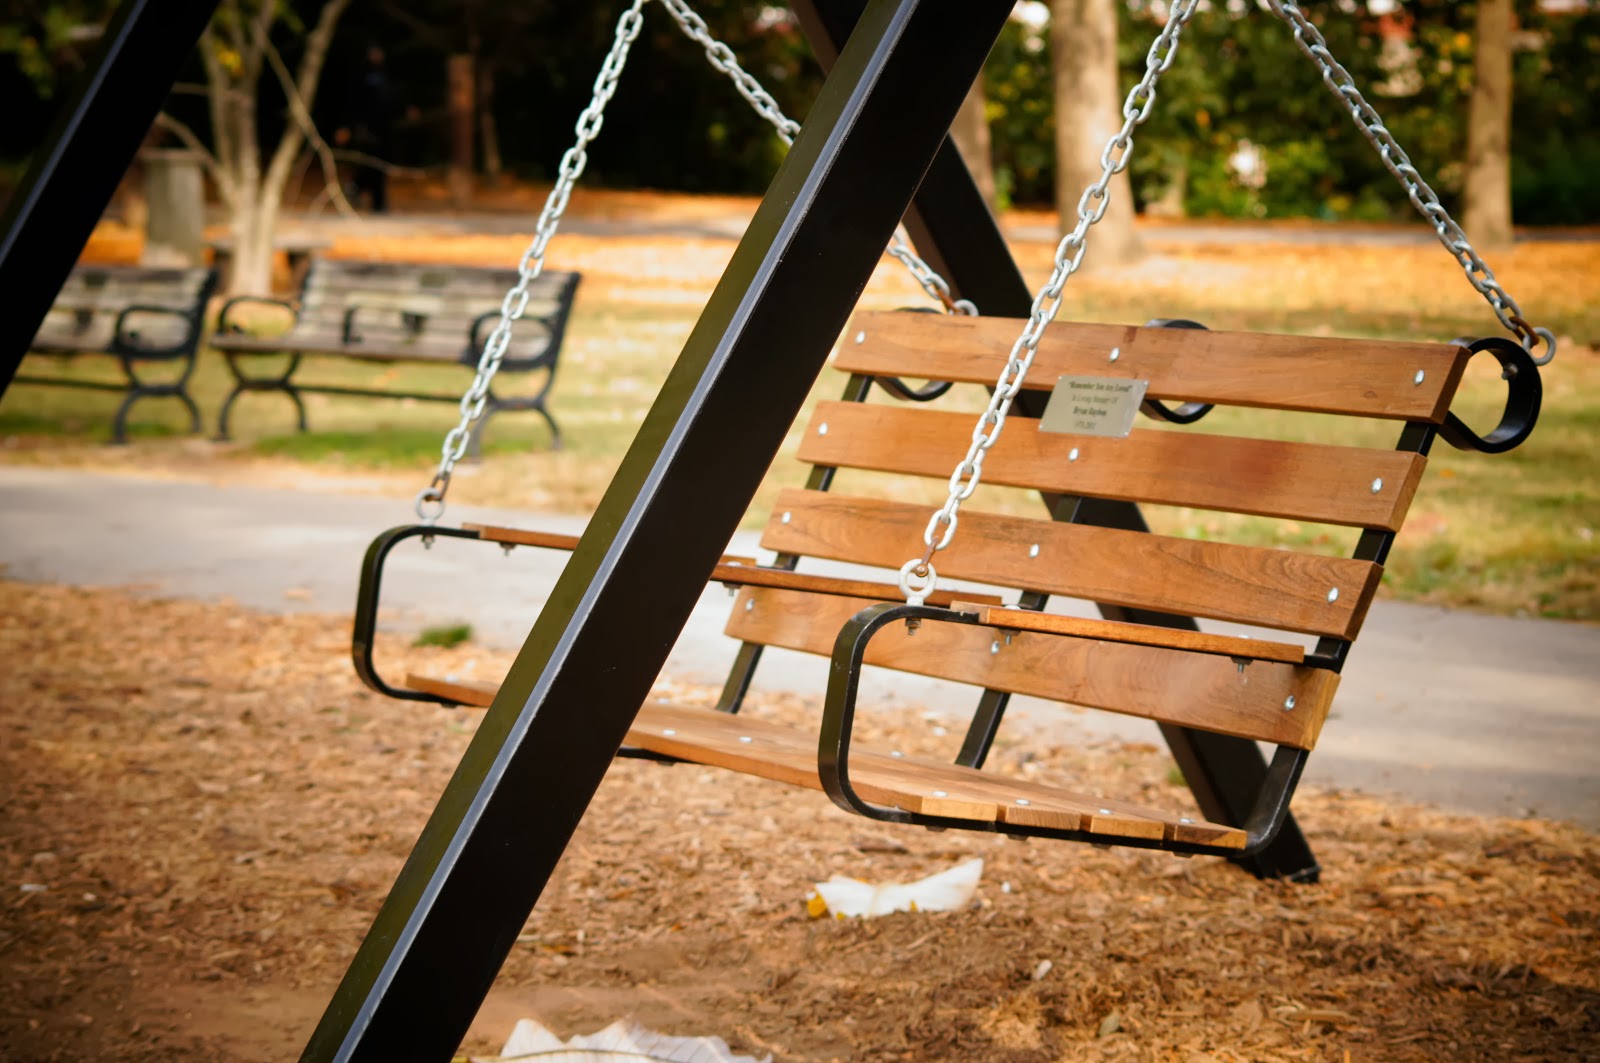 [park-swing-free-pictures-1%2520%25282694%2529%255B3%255D.jpg]